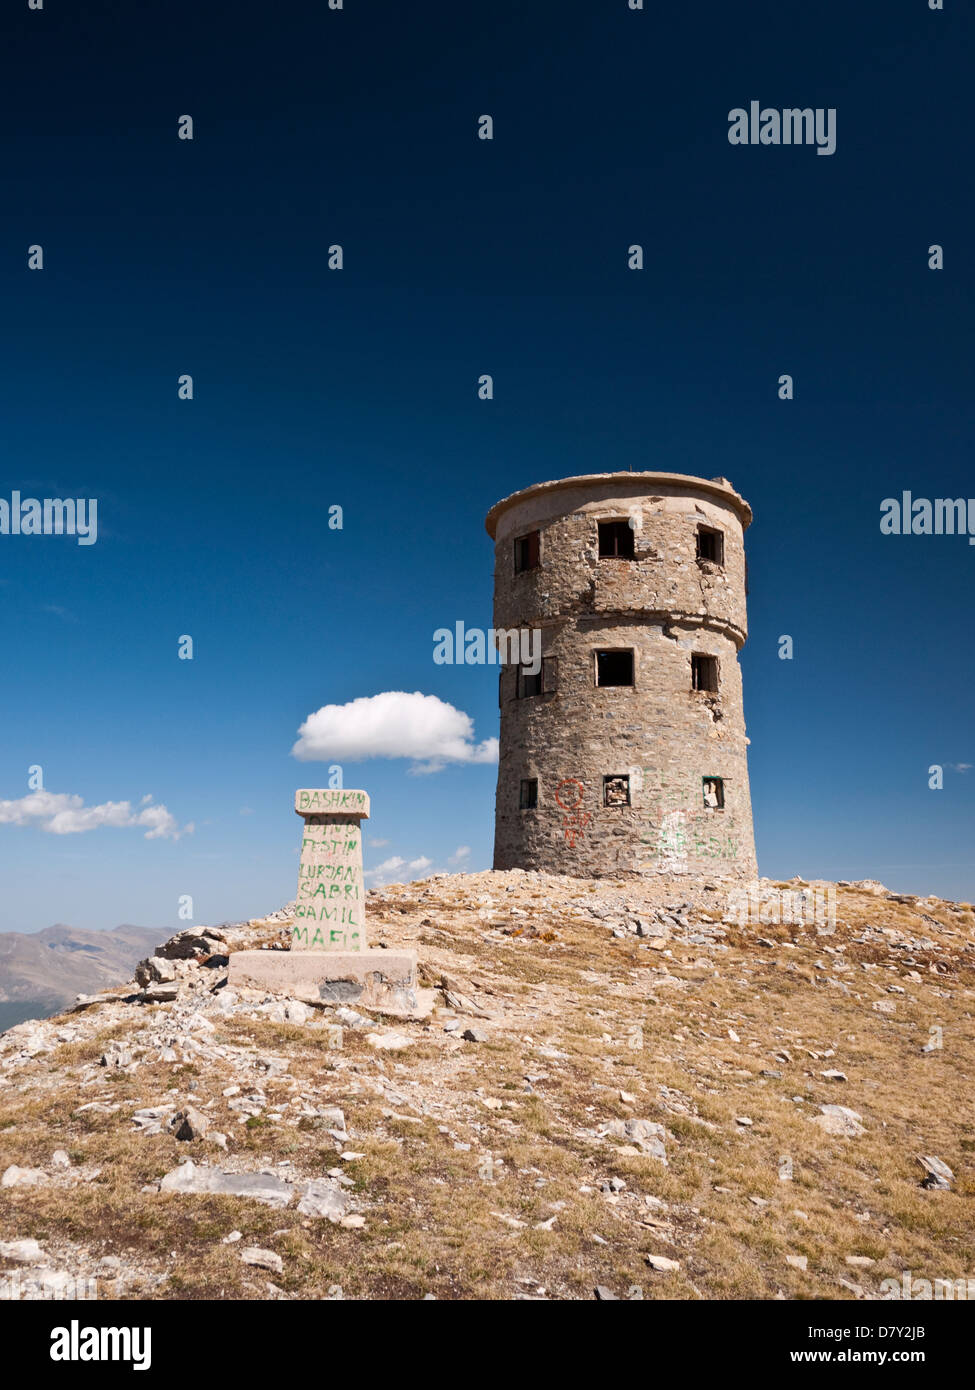 Summit watchtower and trig point on Titov Vrv (2747m), the highest peak in Sar Planina, Macedonia Stock Photo